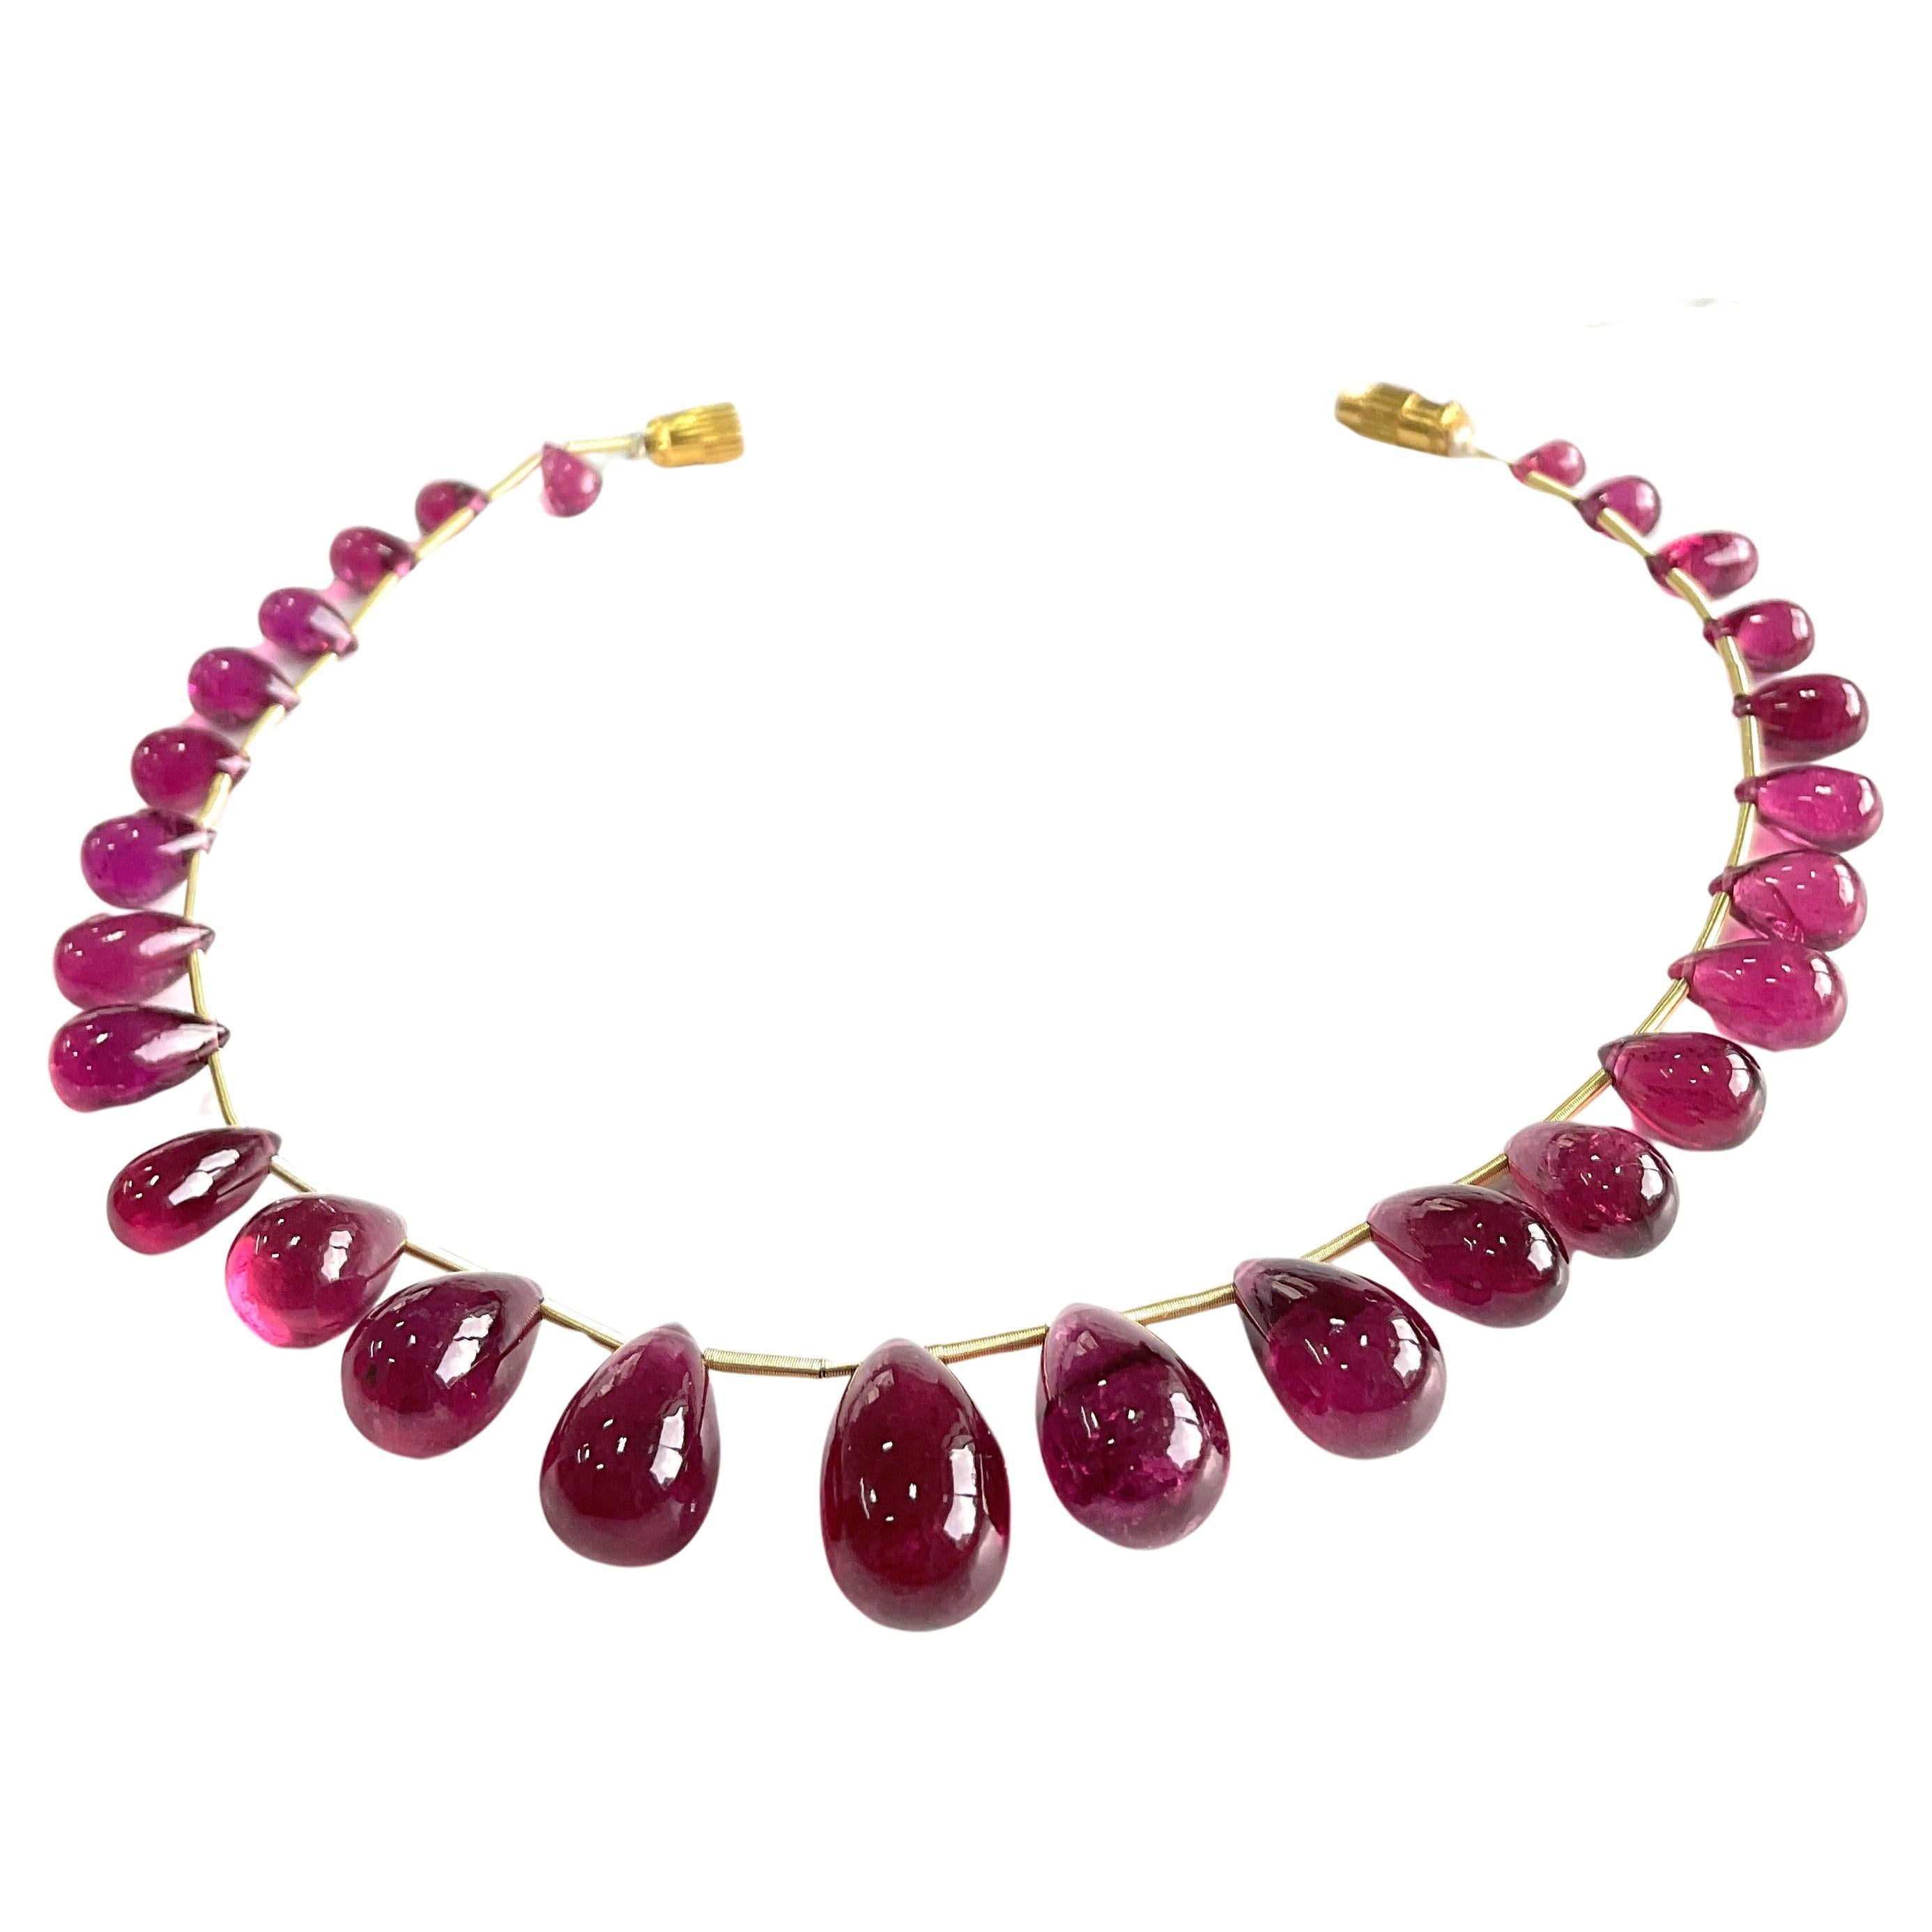 80.00 Carats Rubellite Layout Drops Top Quality For Fine Jewelry Natural Gem